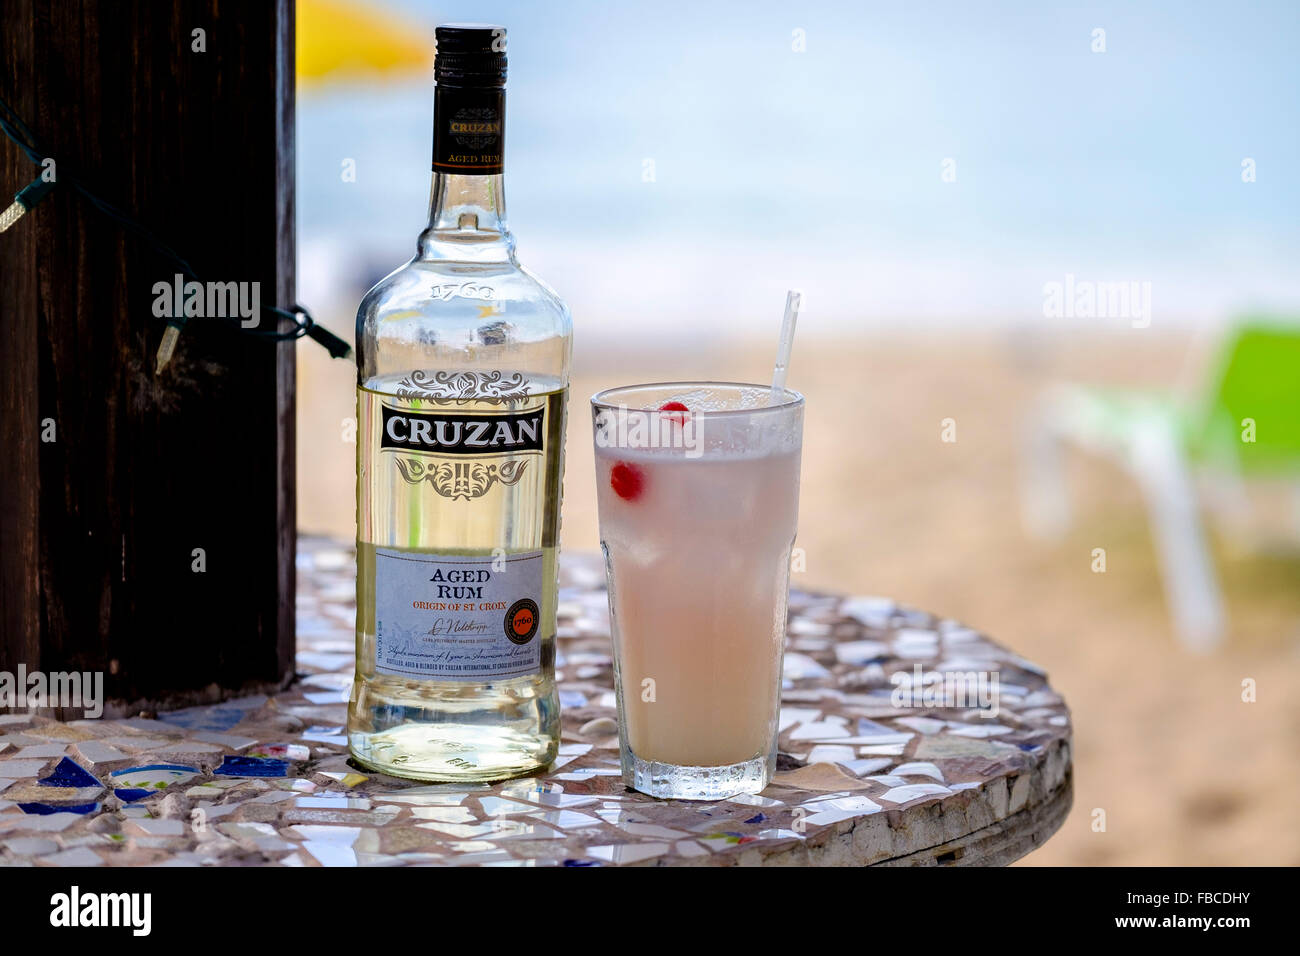 A bottle of Cruzan aged rum and a rum cocktail in a glass sitting on a beach table, St. Croix, U.S. Virgin Islands. Stock Photo